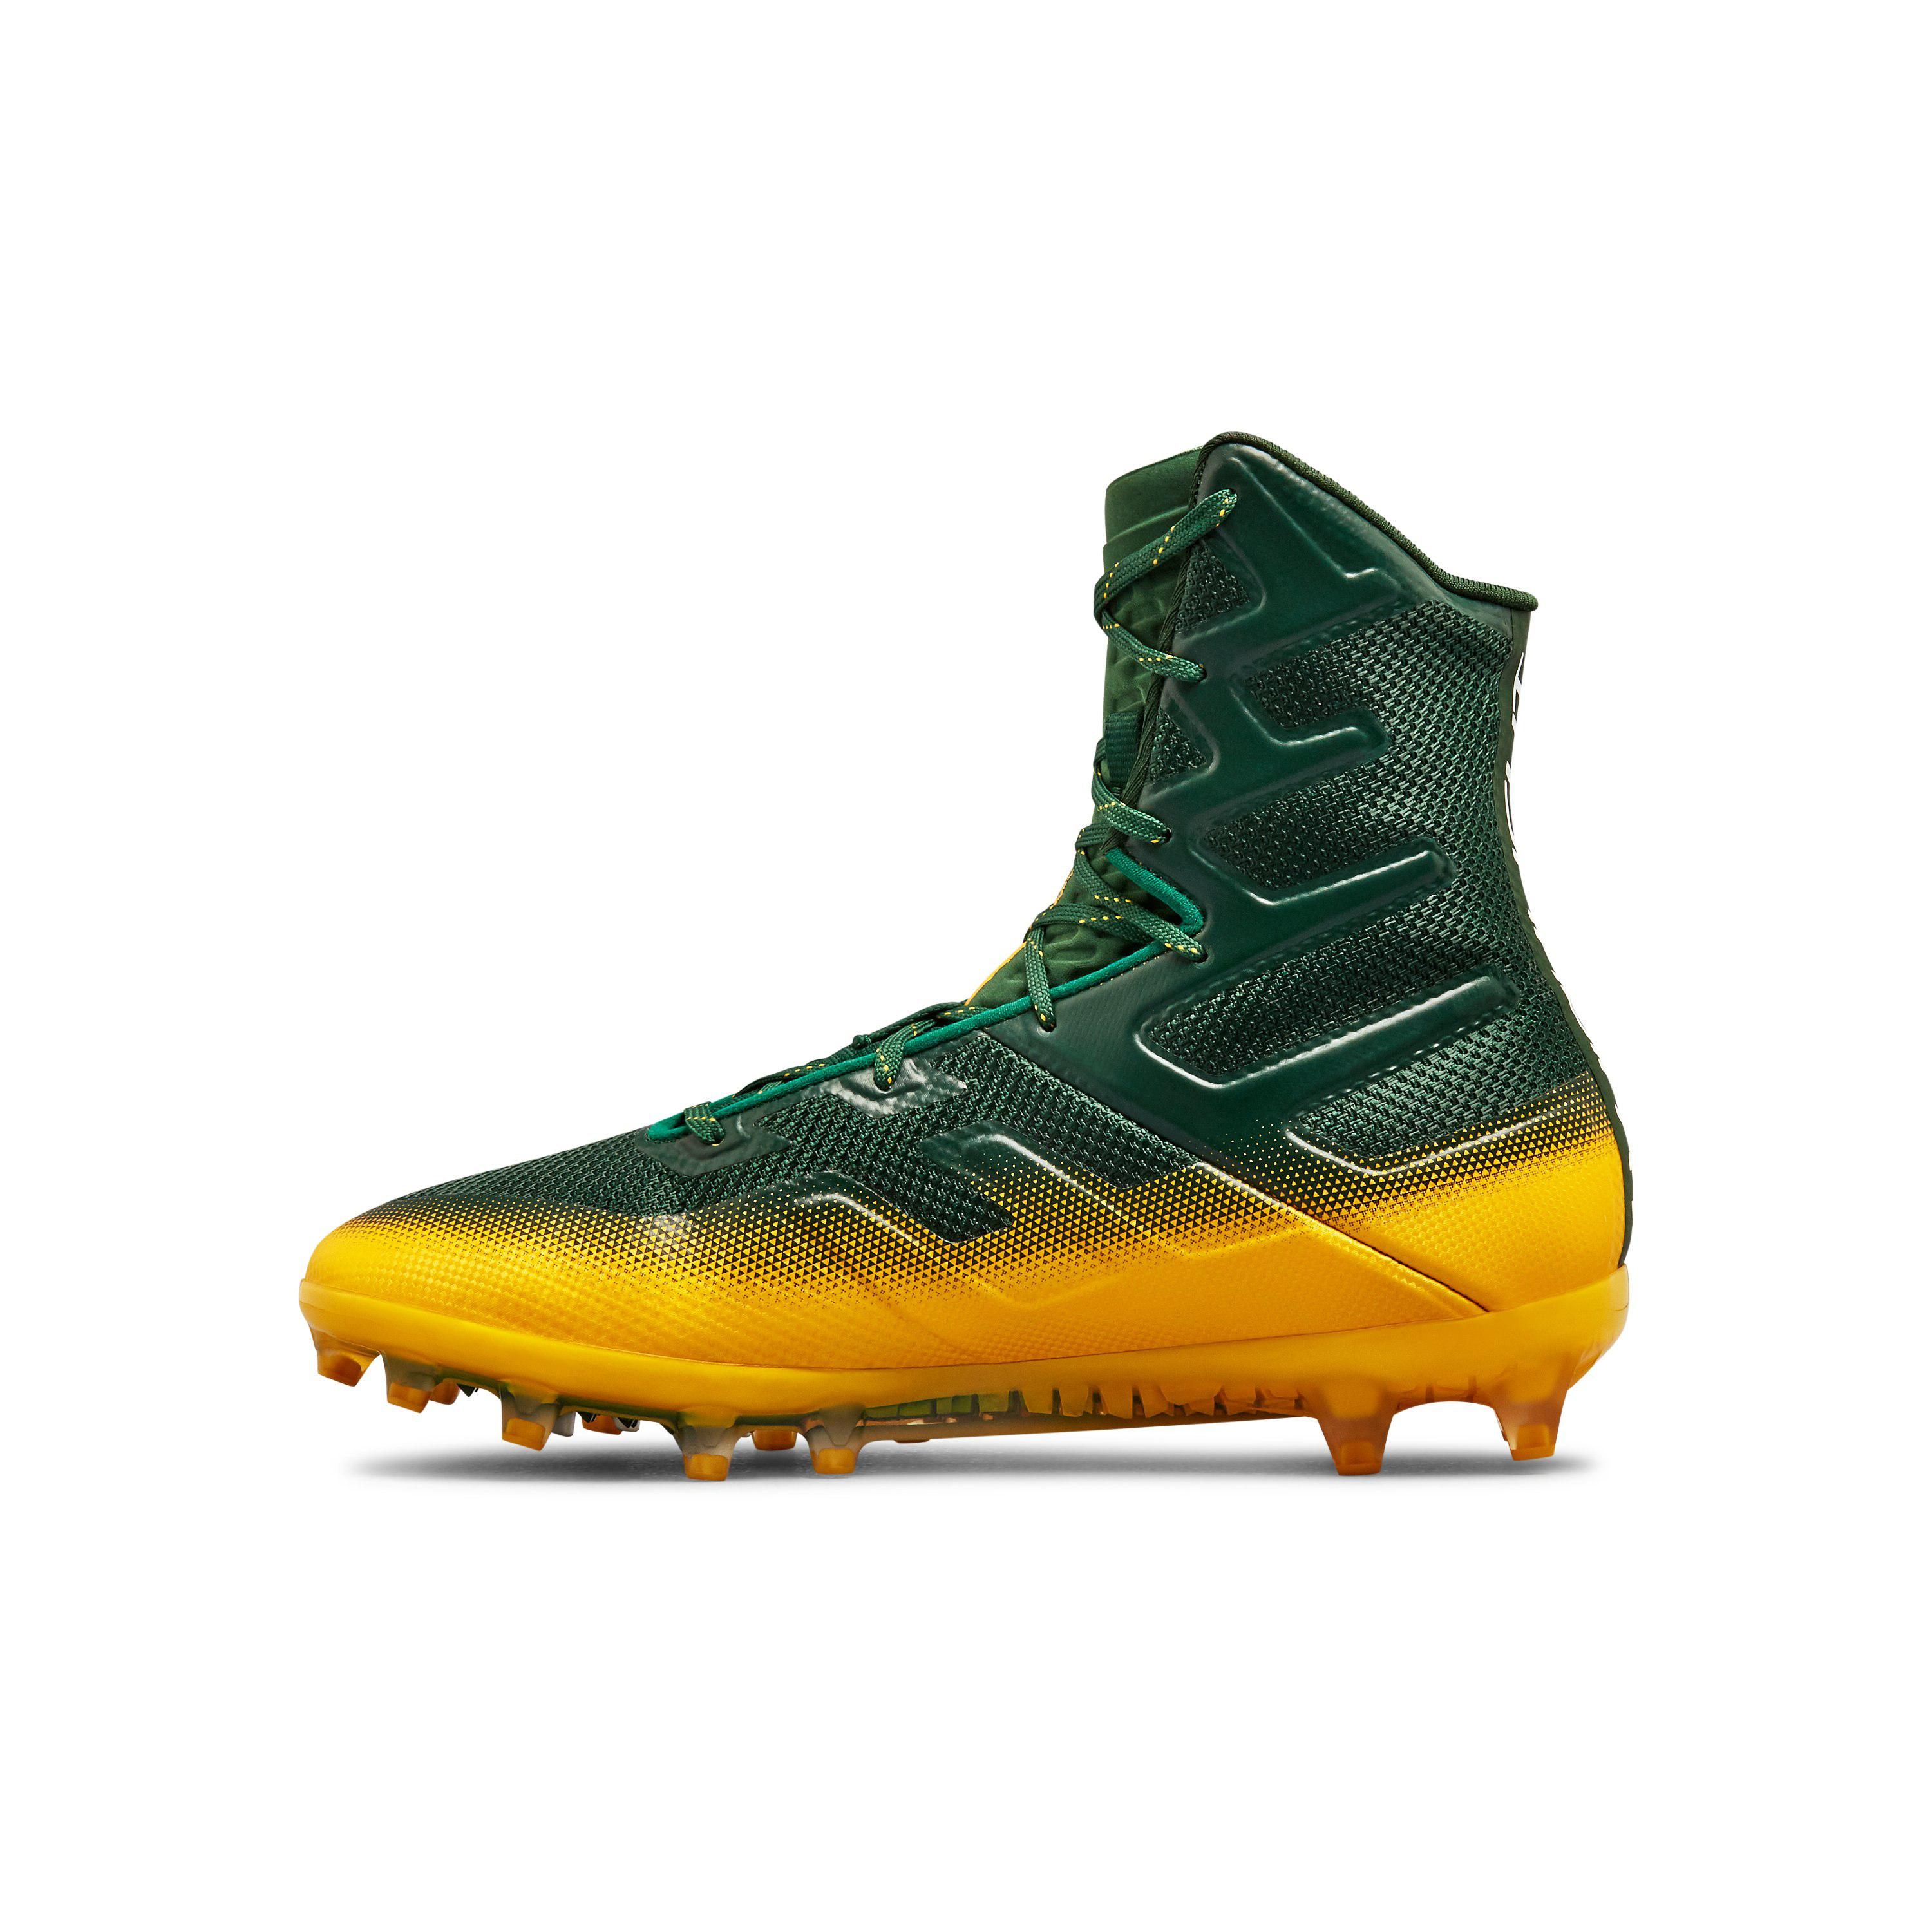 green and yellow football cleats